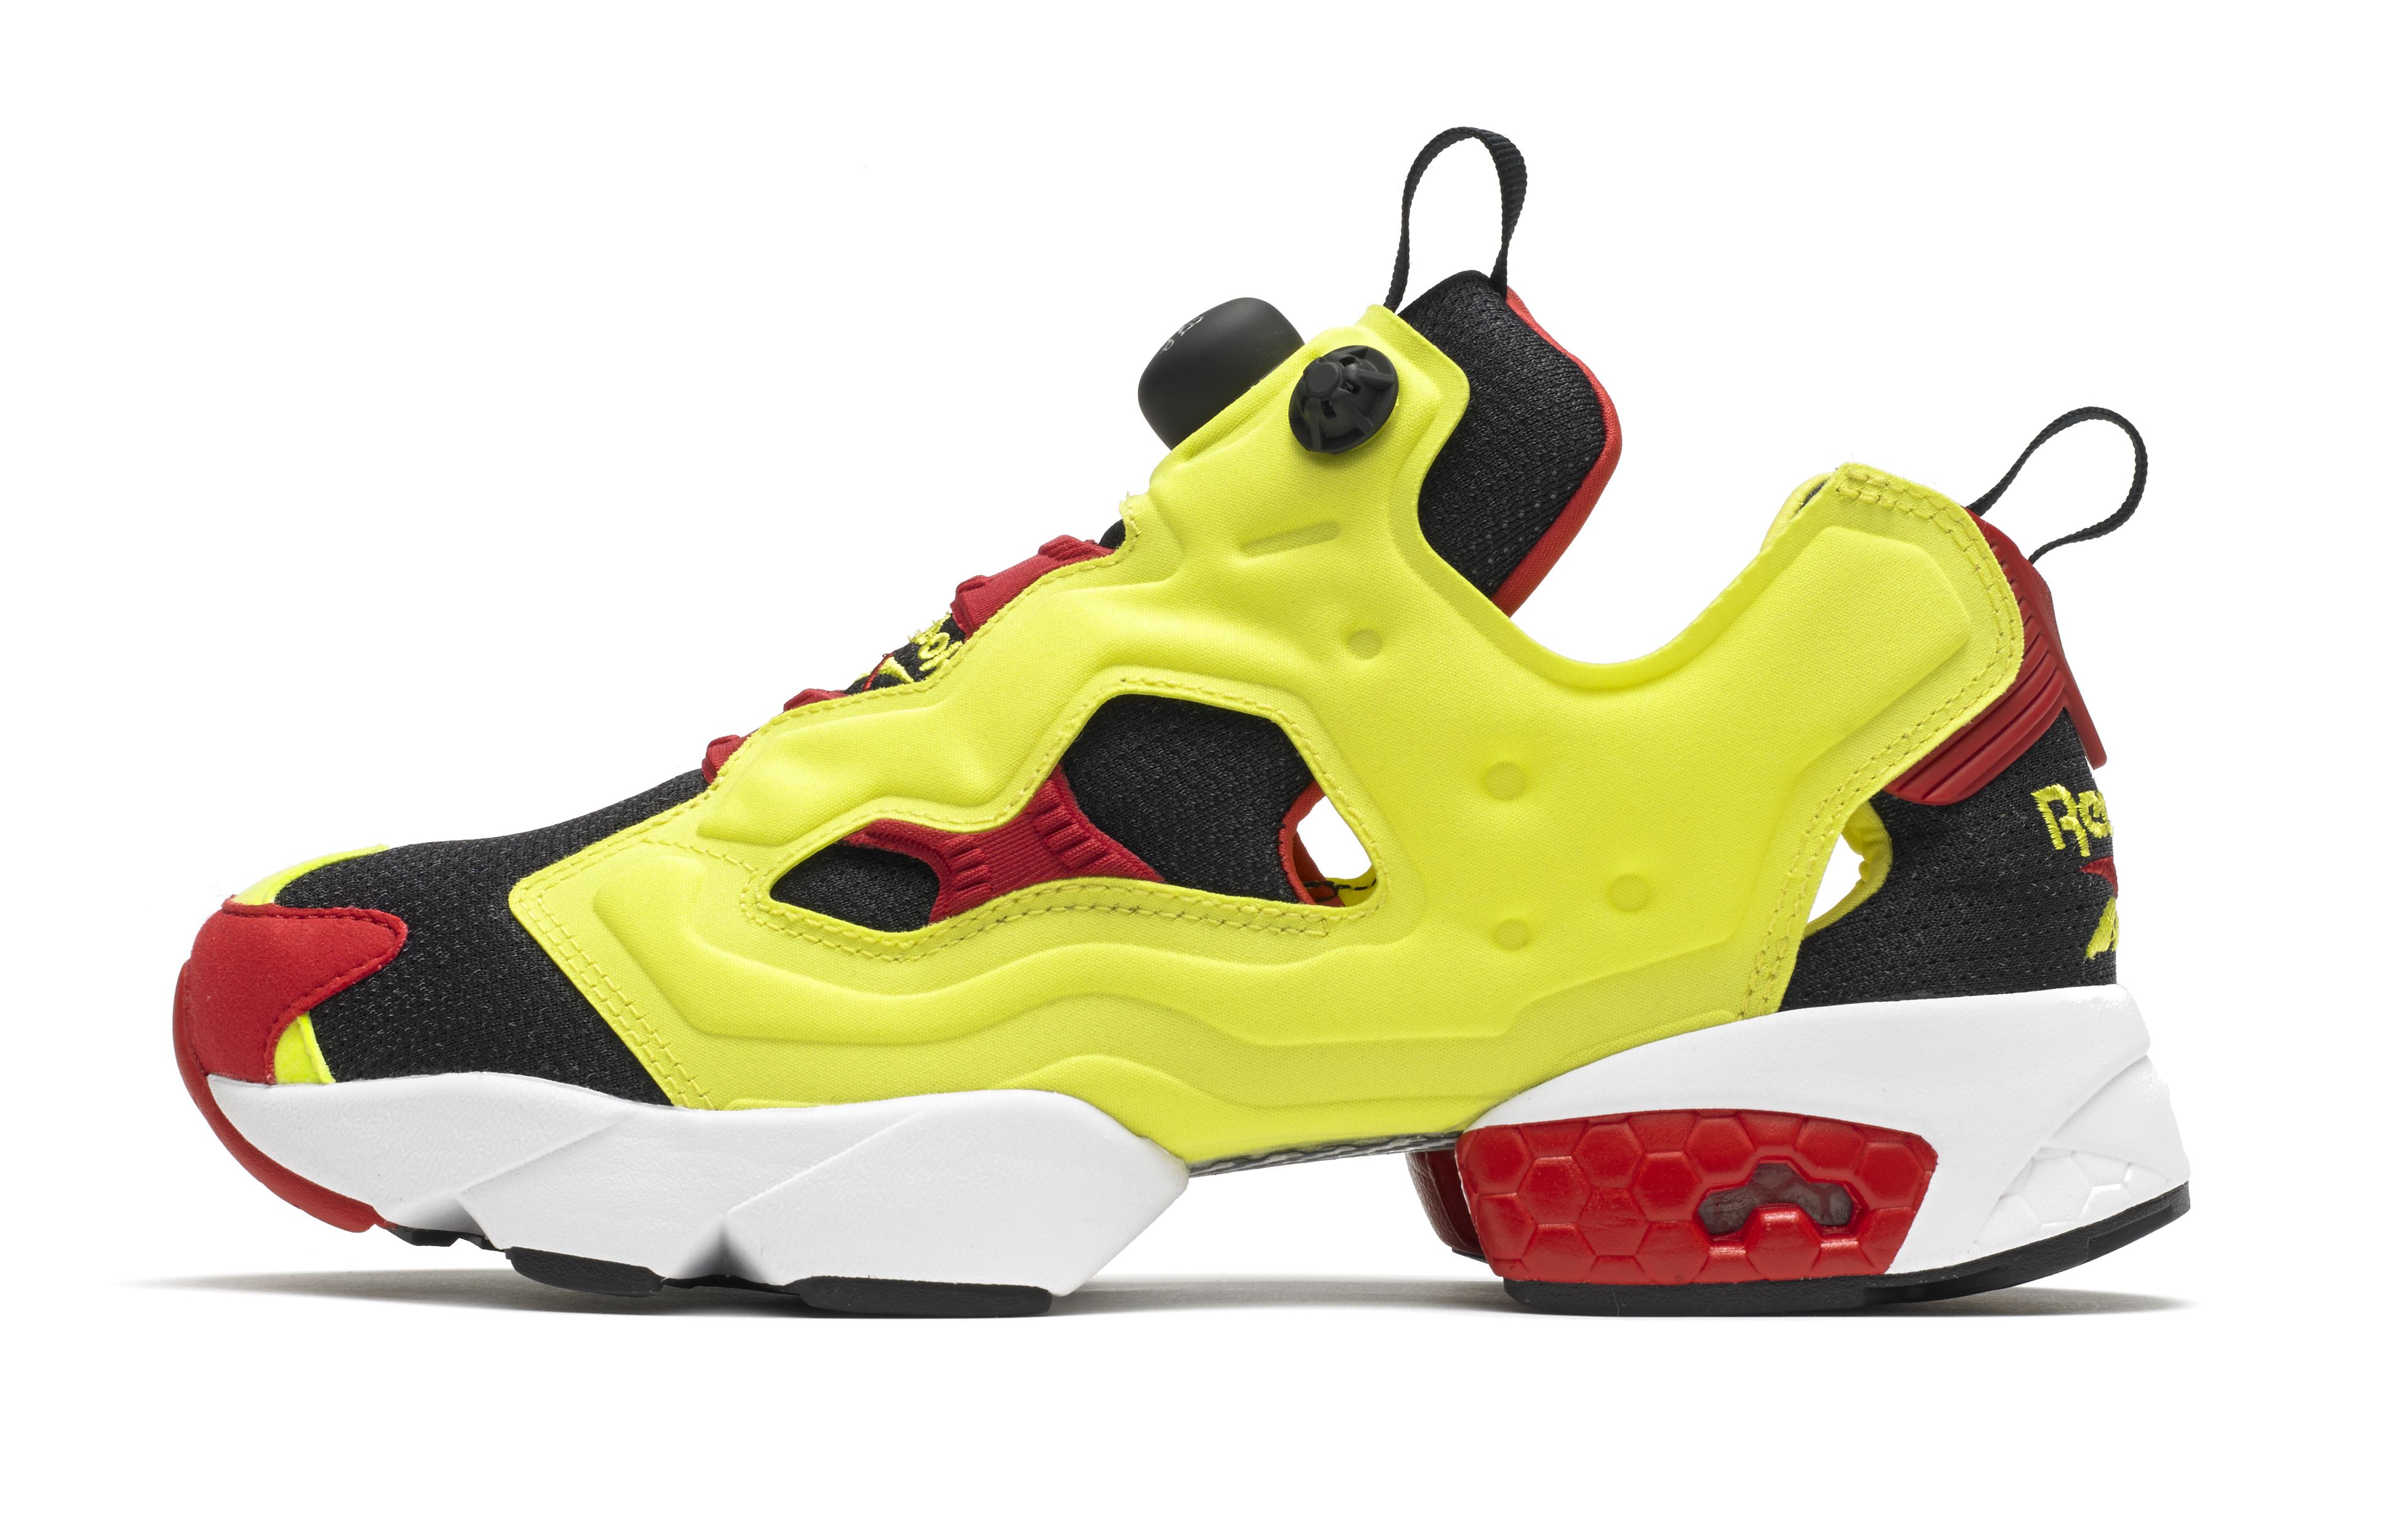 Reebok Insta Pump Fury OG 'Citron' | Official Images | SneakerFiles